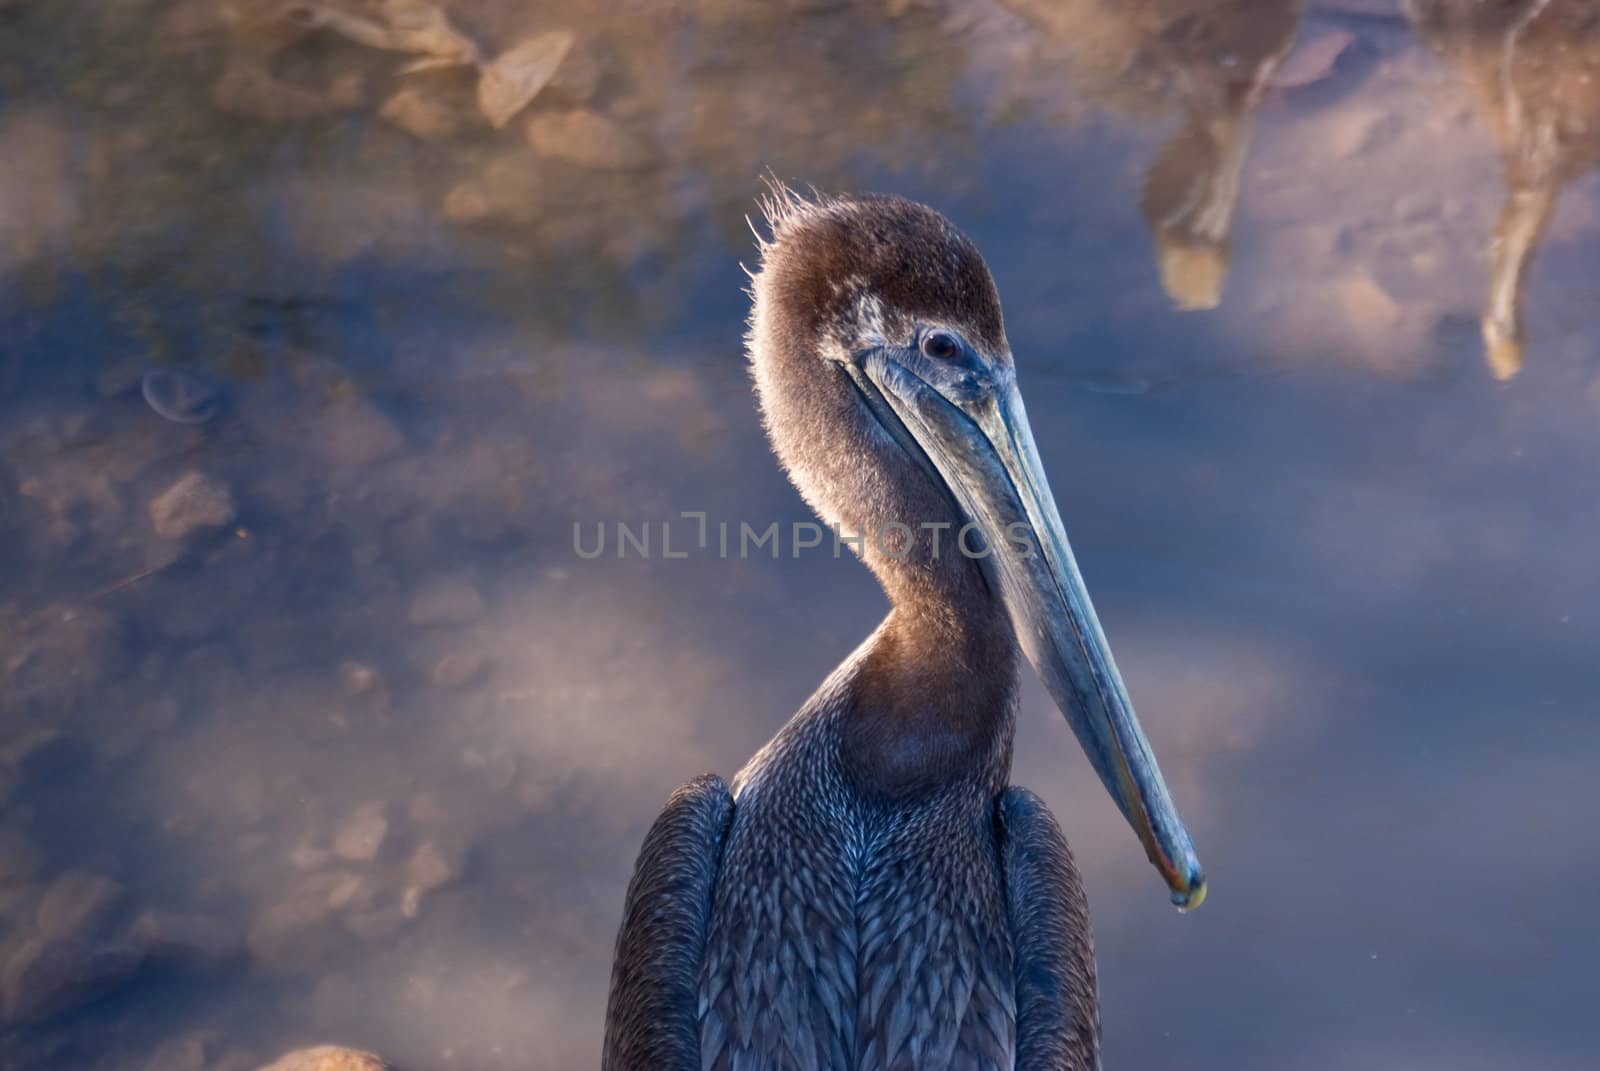 Young pelican in profile against water